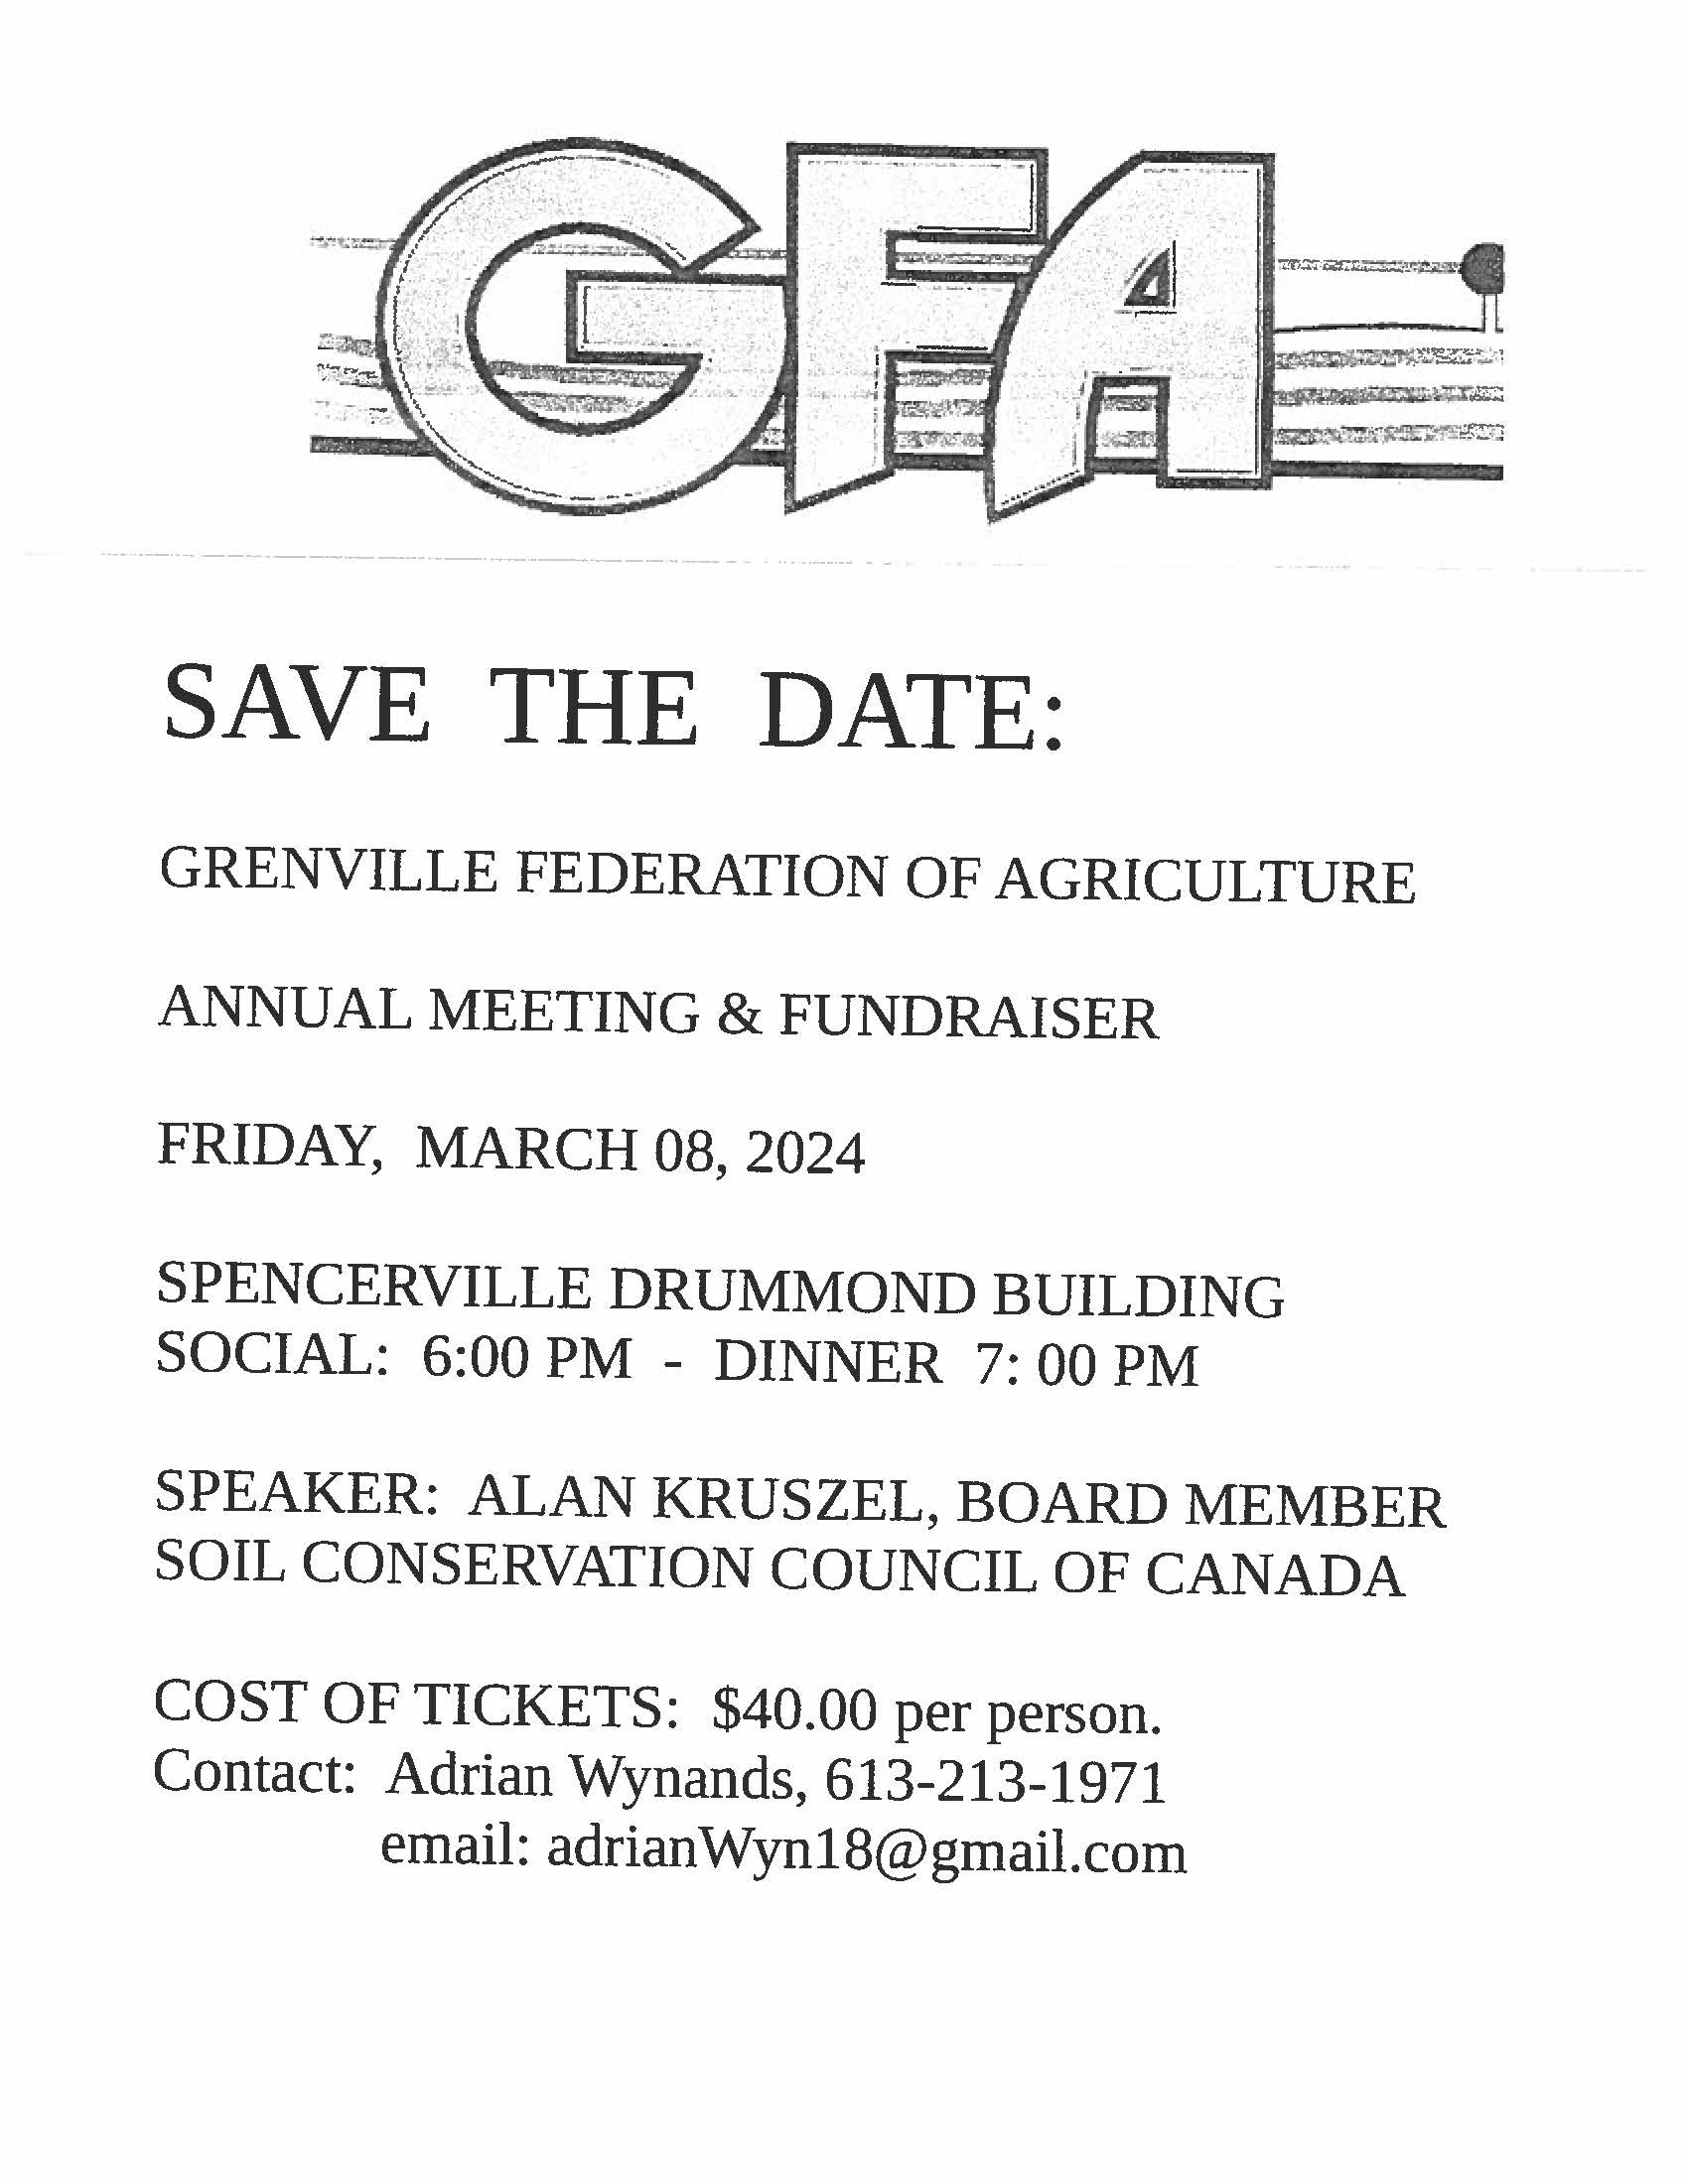 grenville federation of agriculture annual meeting and banquet poster